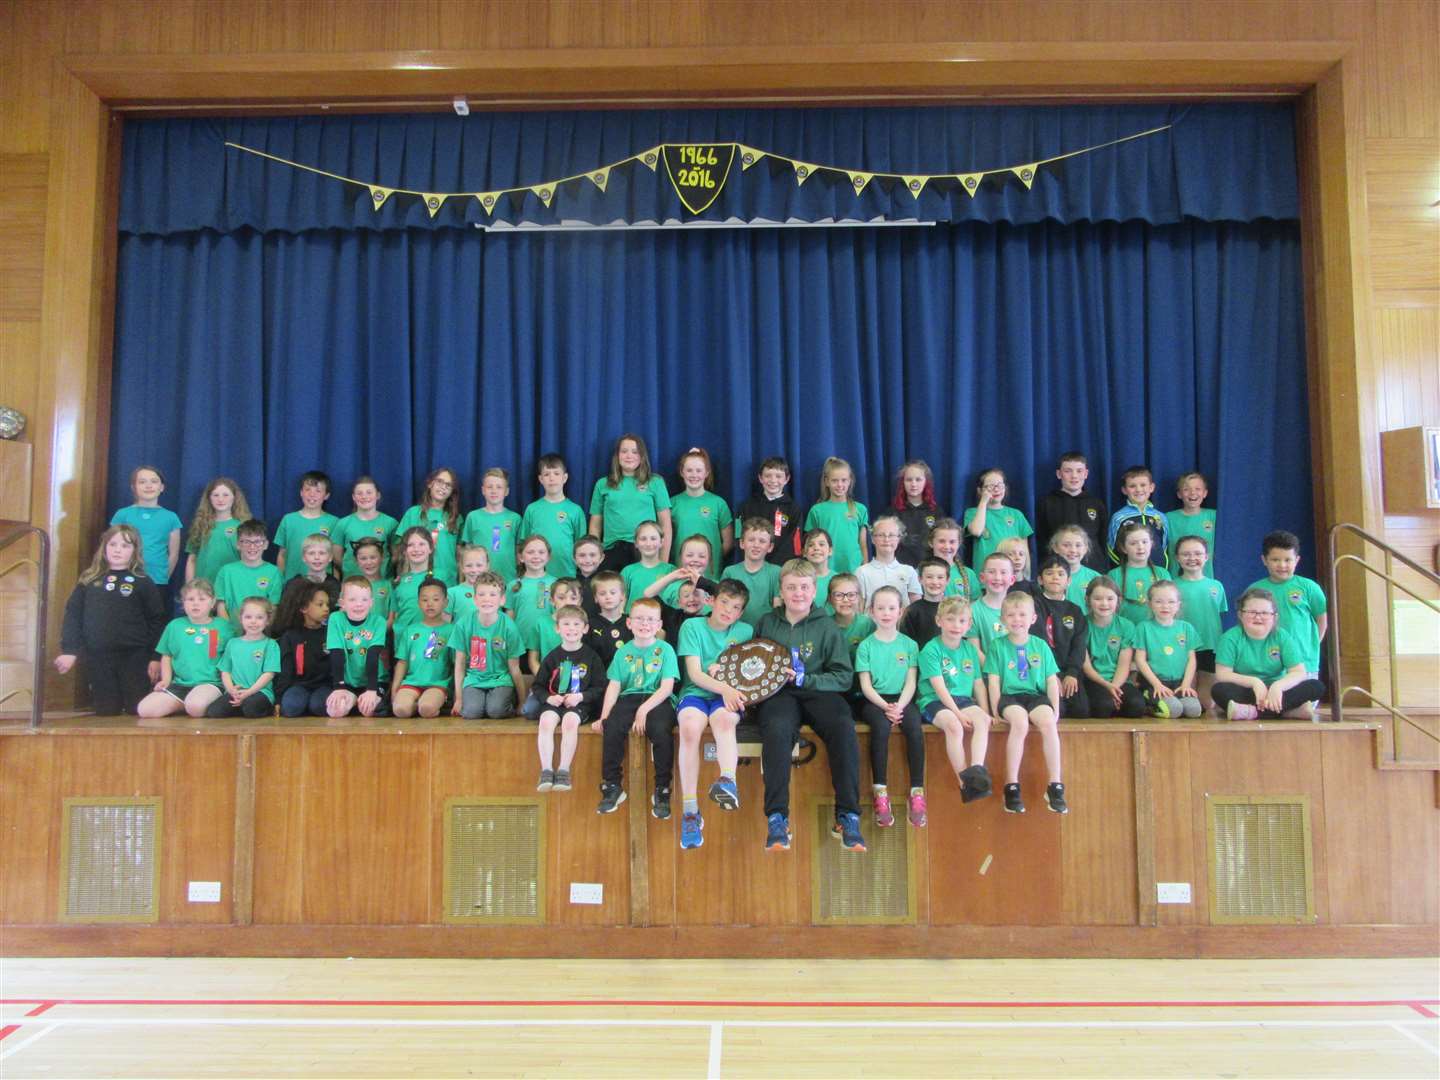 Harald were overall winners in Mount Pleasant Primary School's annual sports as well as overall house point winners.